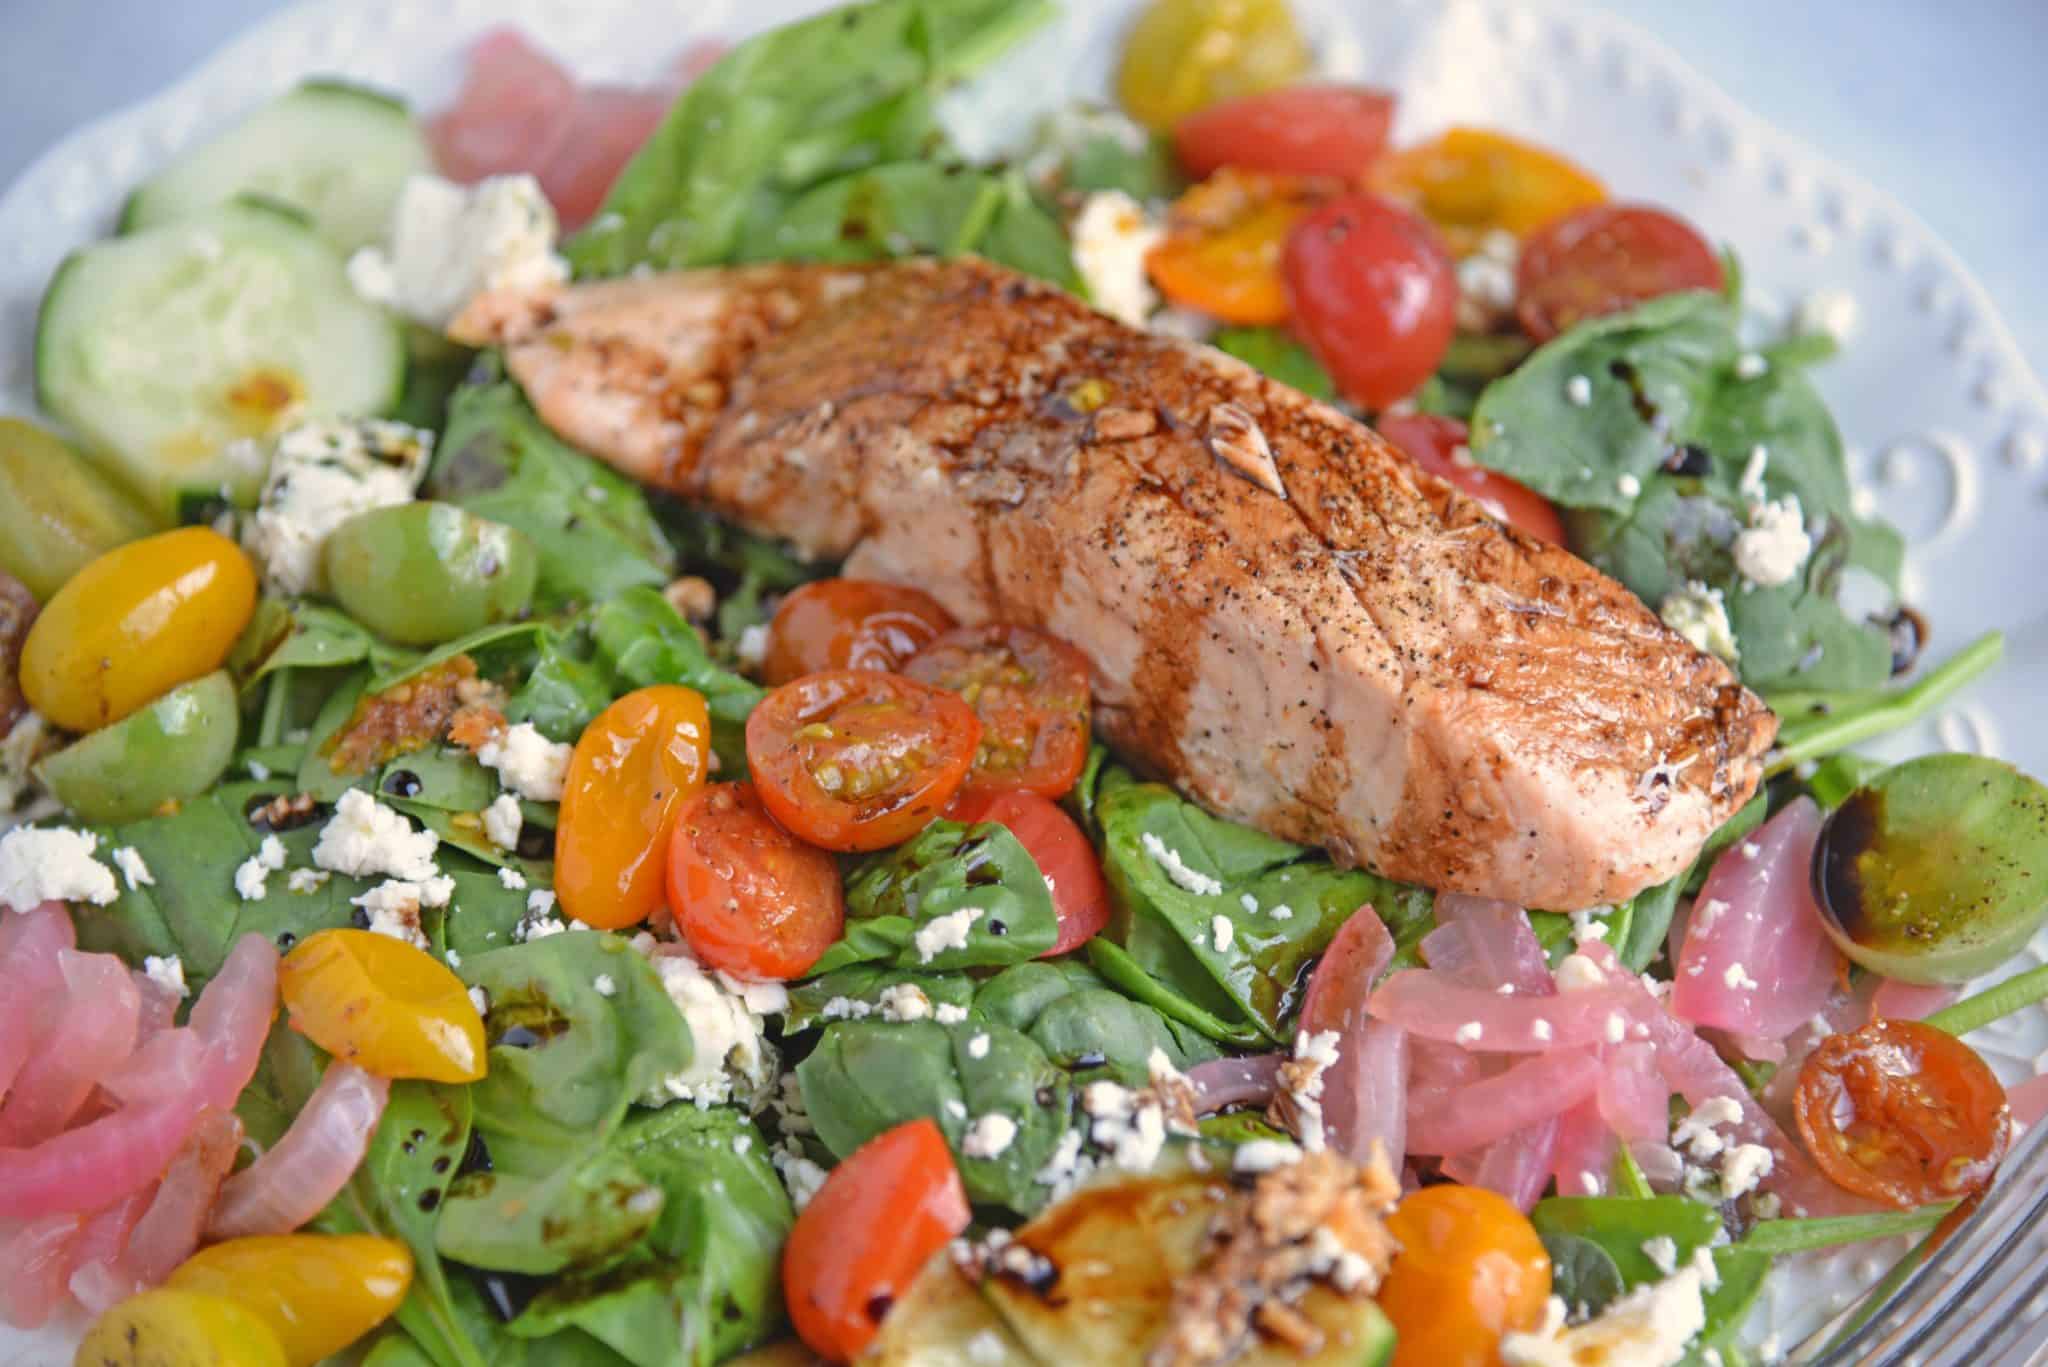 Balsamic Salmon Salad is an easy salad recipe that can be made for dinner, or even an on the go lunch! Serve with chèvre bread for a delicious combination! #salmonsaladrecipe #salmonrecipes www.savoryexperiments.com